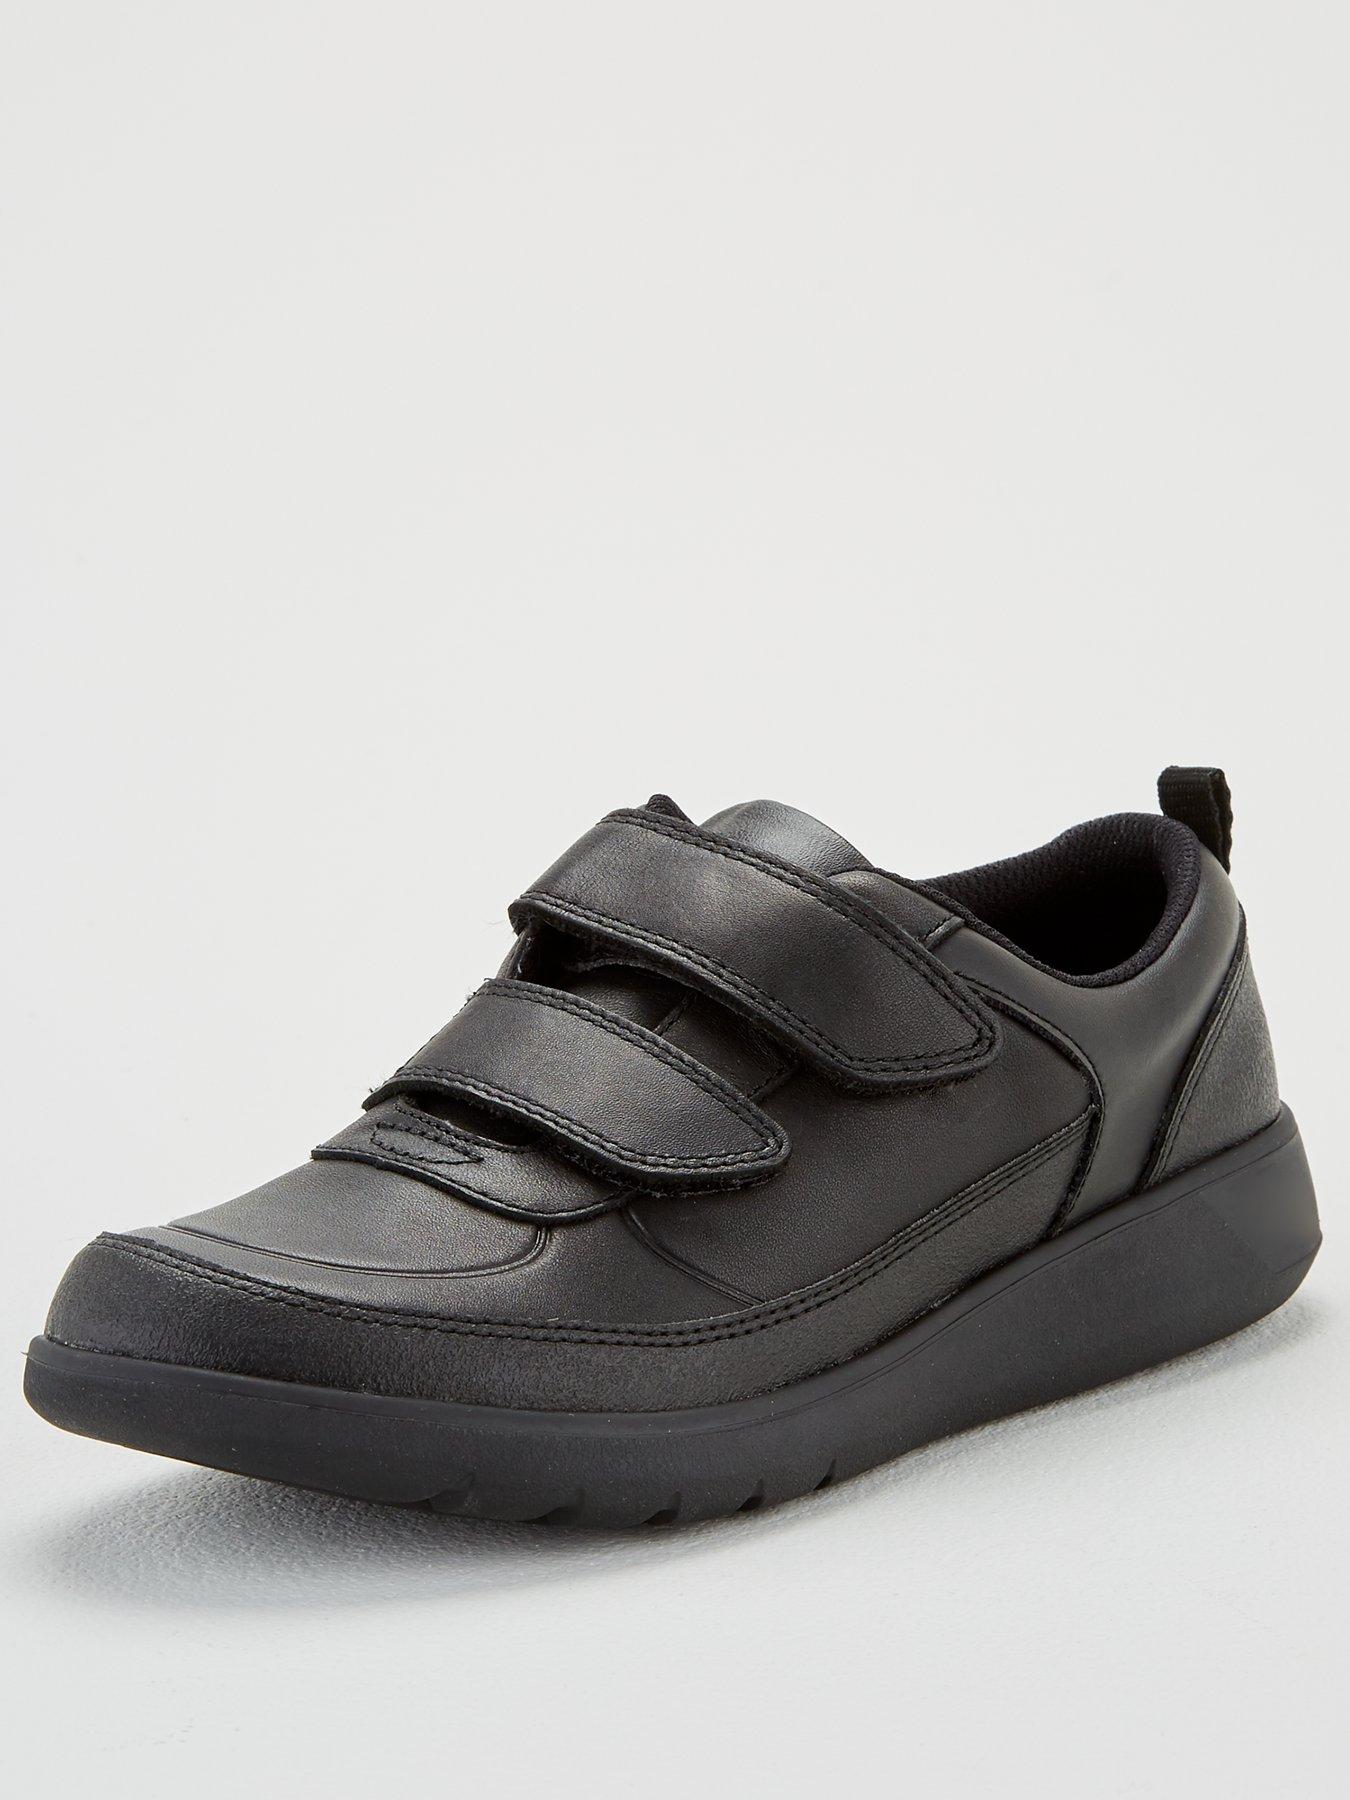 clarks school shoes for boys